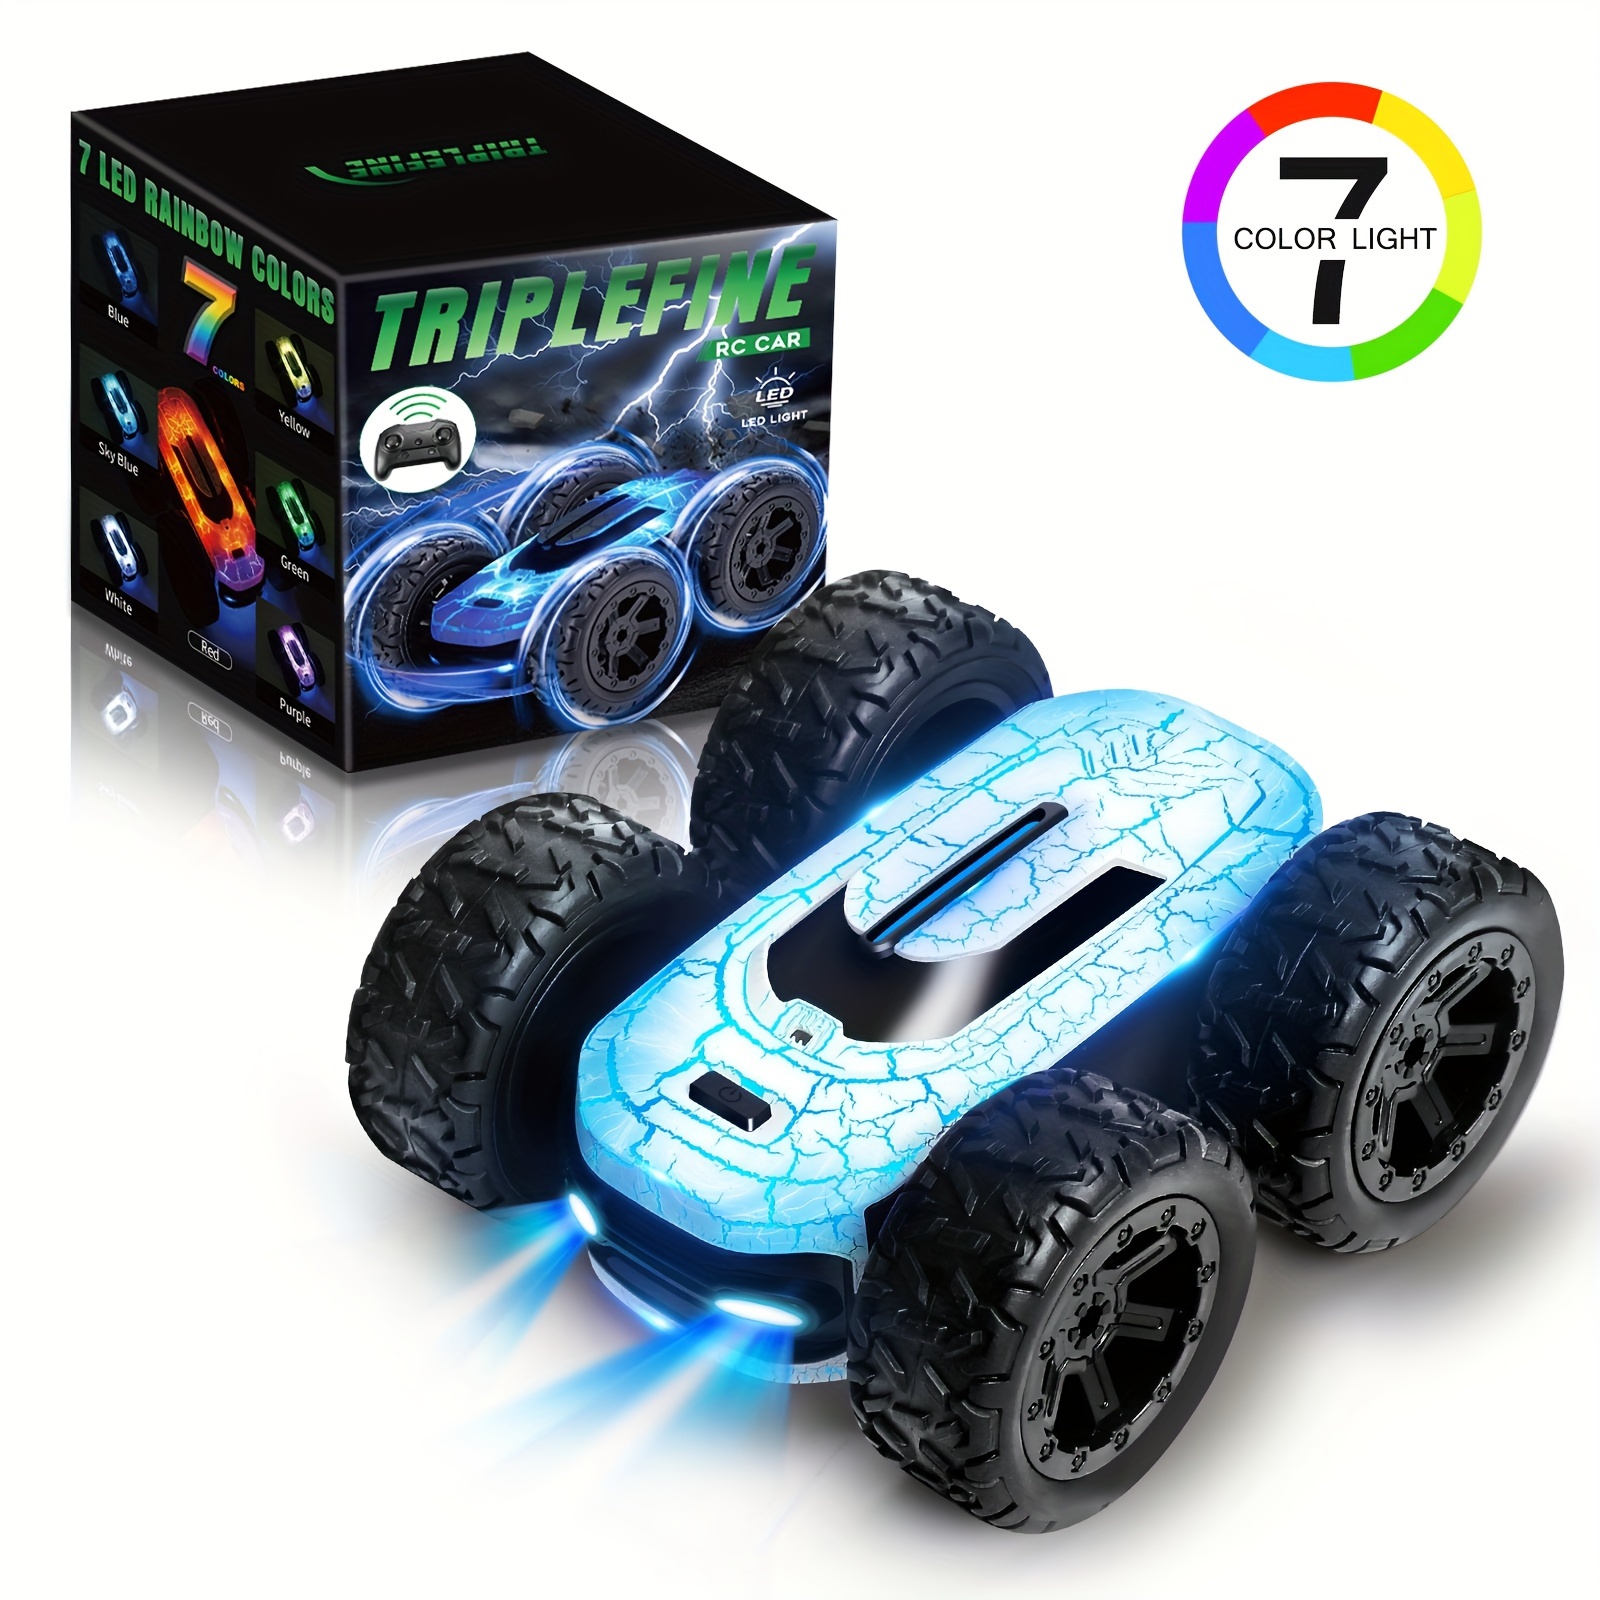 

Remote Control Car For Kids 8-12, 360°rotating With 2 Batteries, Double-sided Rc Car Stunt Car Toy, 2.4ghz Remote Control With Led Lights And Headlights